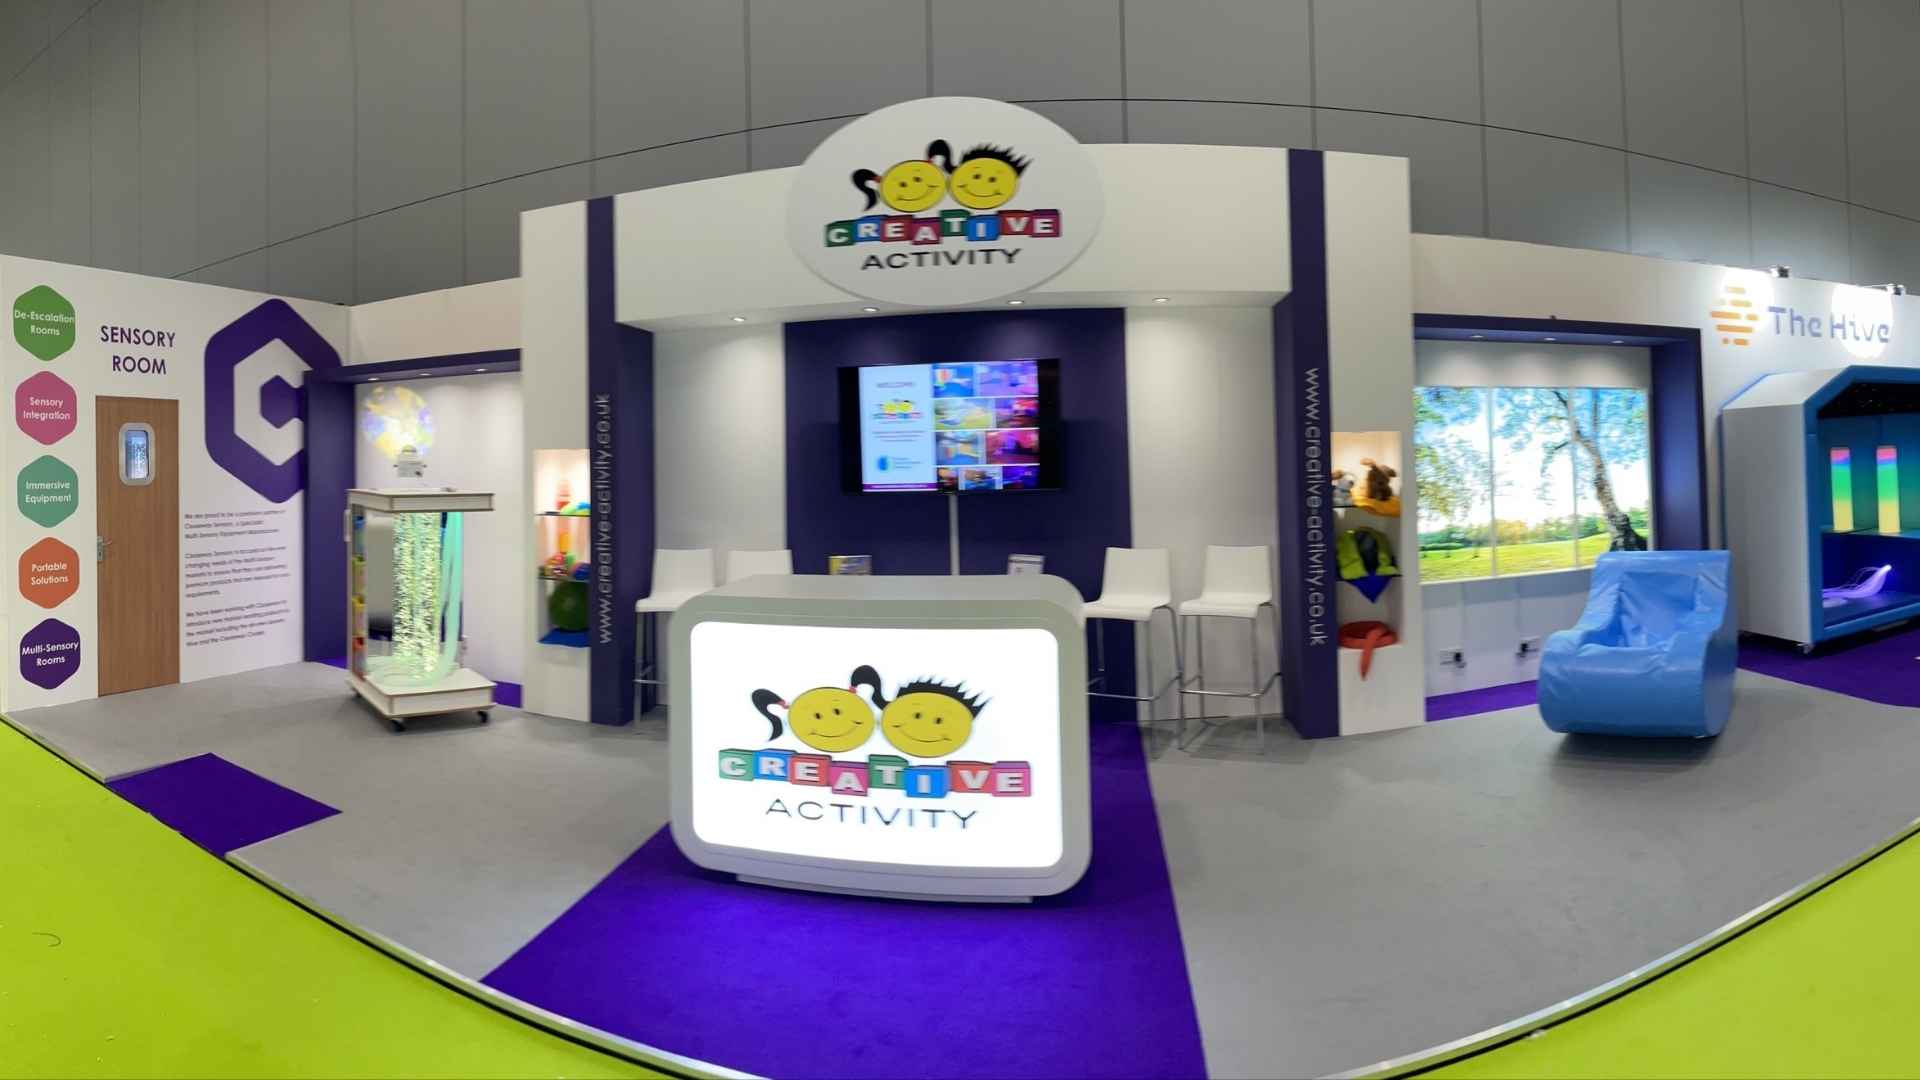 creative activity exhibition stand with sensory room and product displays with reception area